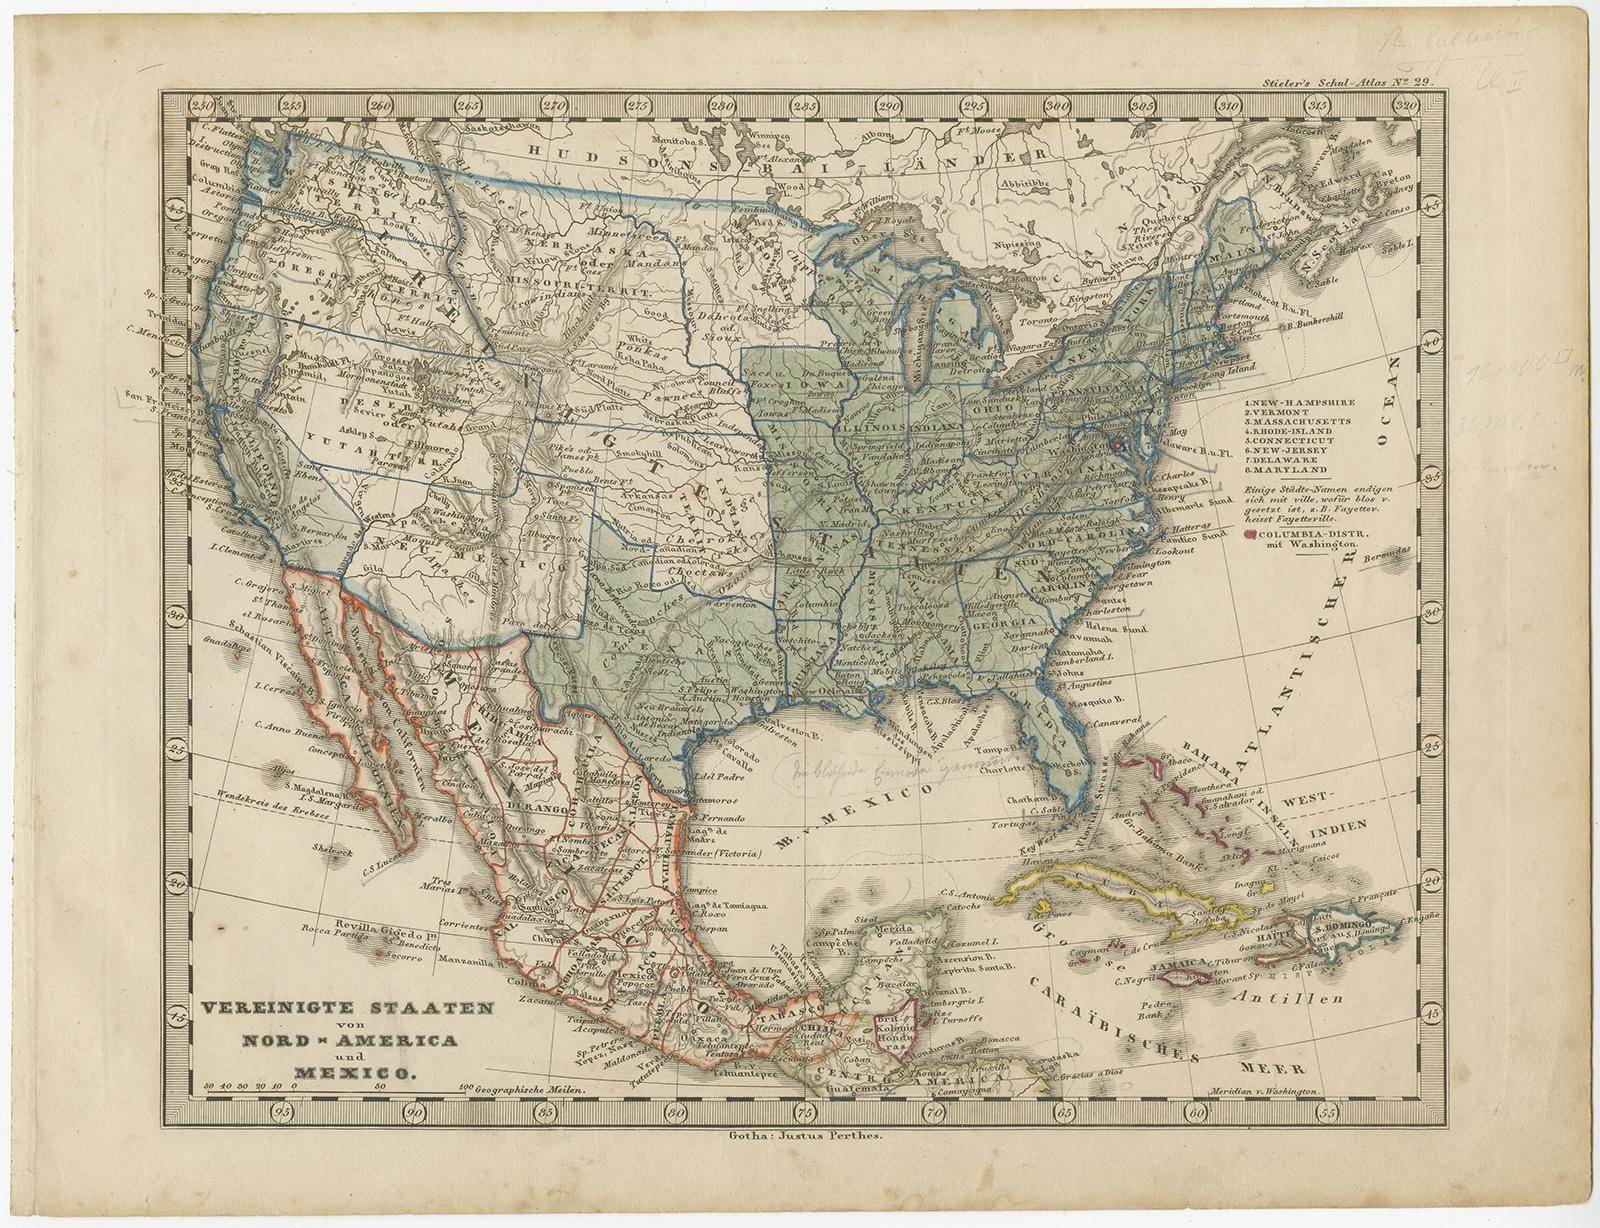 Antique map titled 'Vereinigte Staaten von Nord America und Mexico'. 

Old map the United States and Central America, including Mexico. This print originates from 'Stieler's Schul-Atlas'. 

Artists and Engravers: Adolf Stieler (26 February 1775